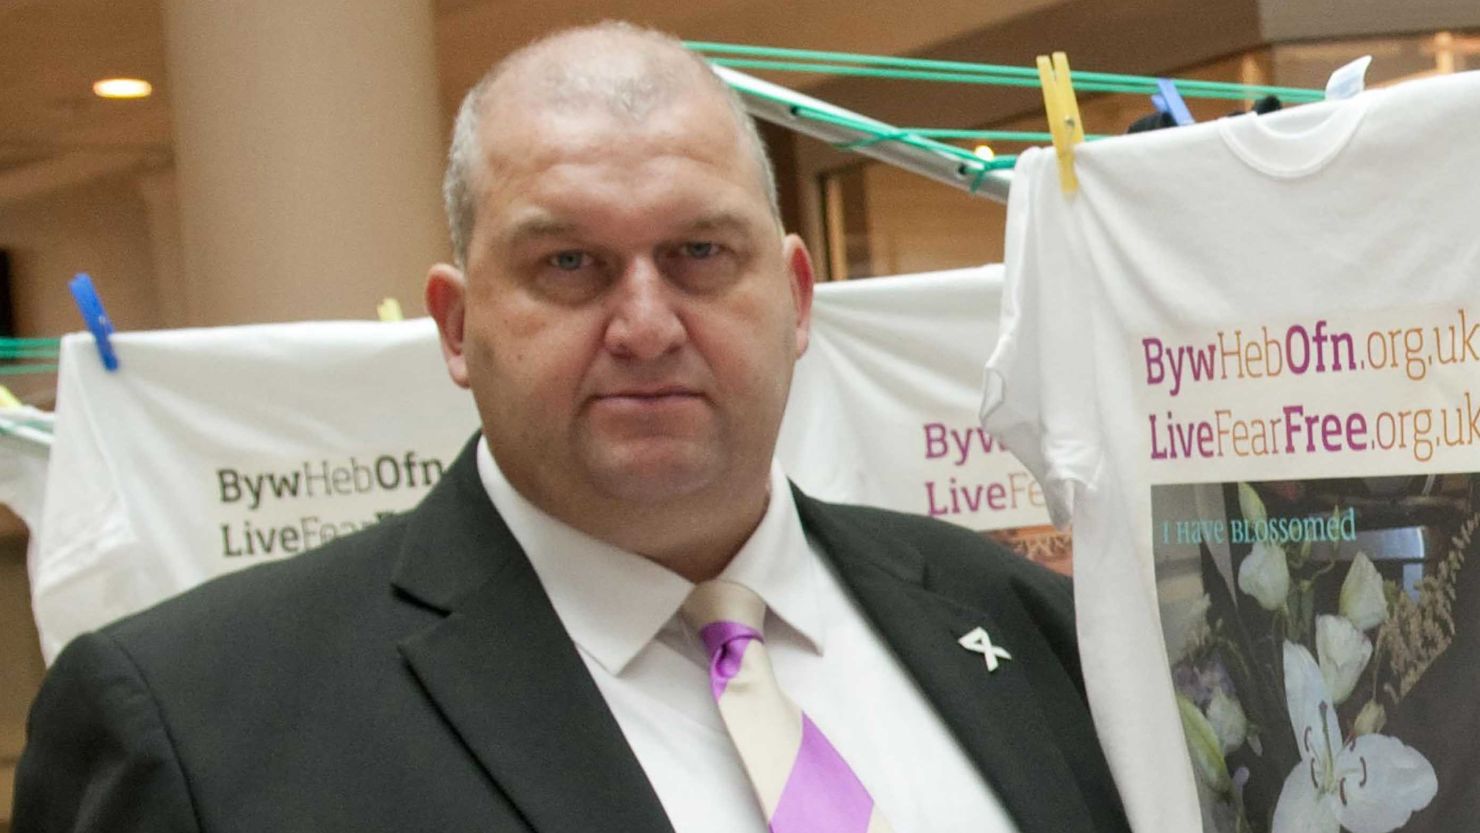 Carl Sargeant denied claims of improper conduct last week. 